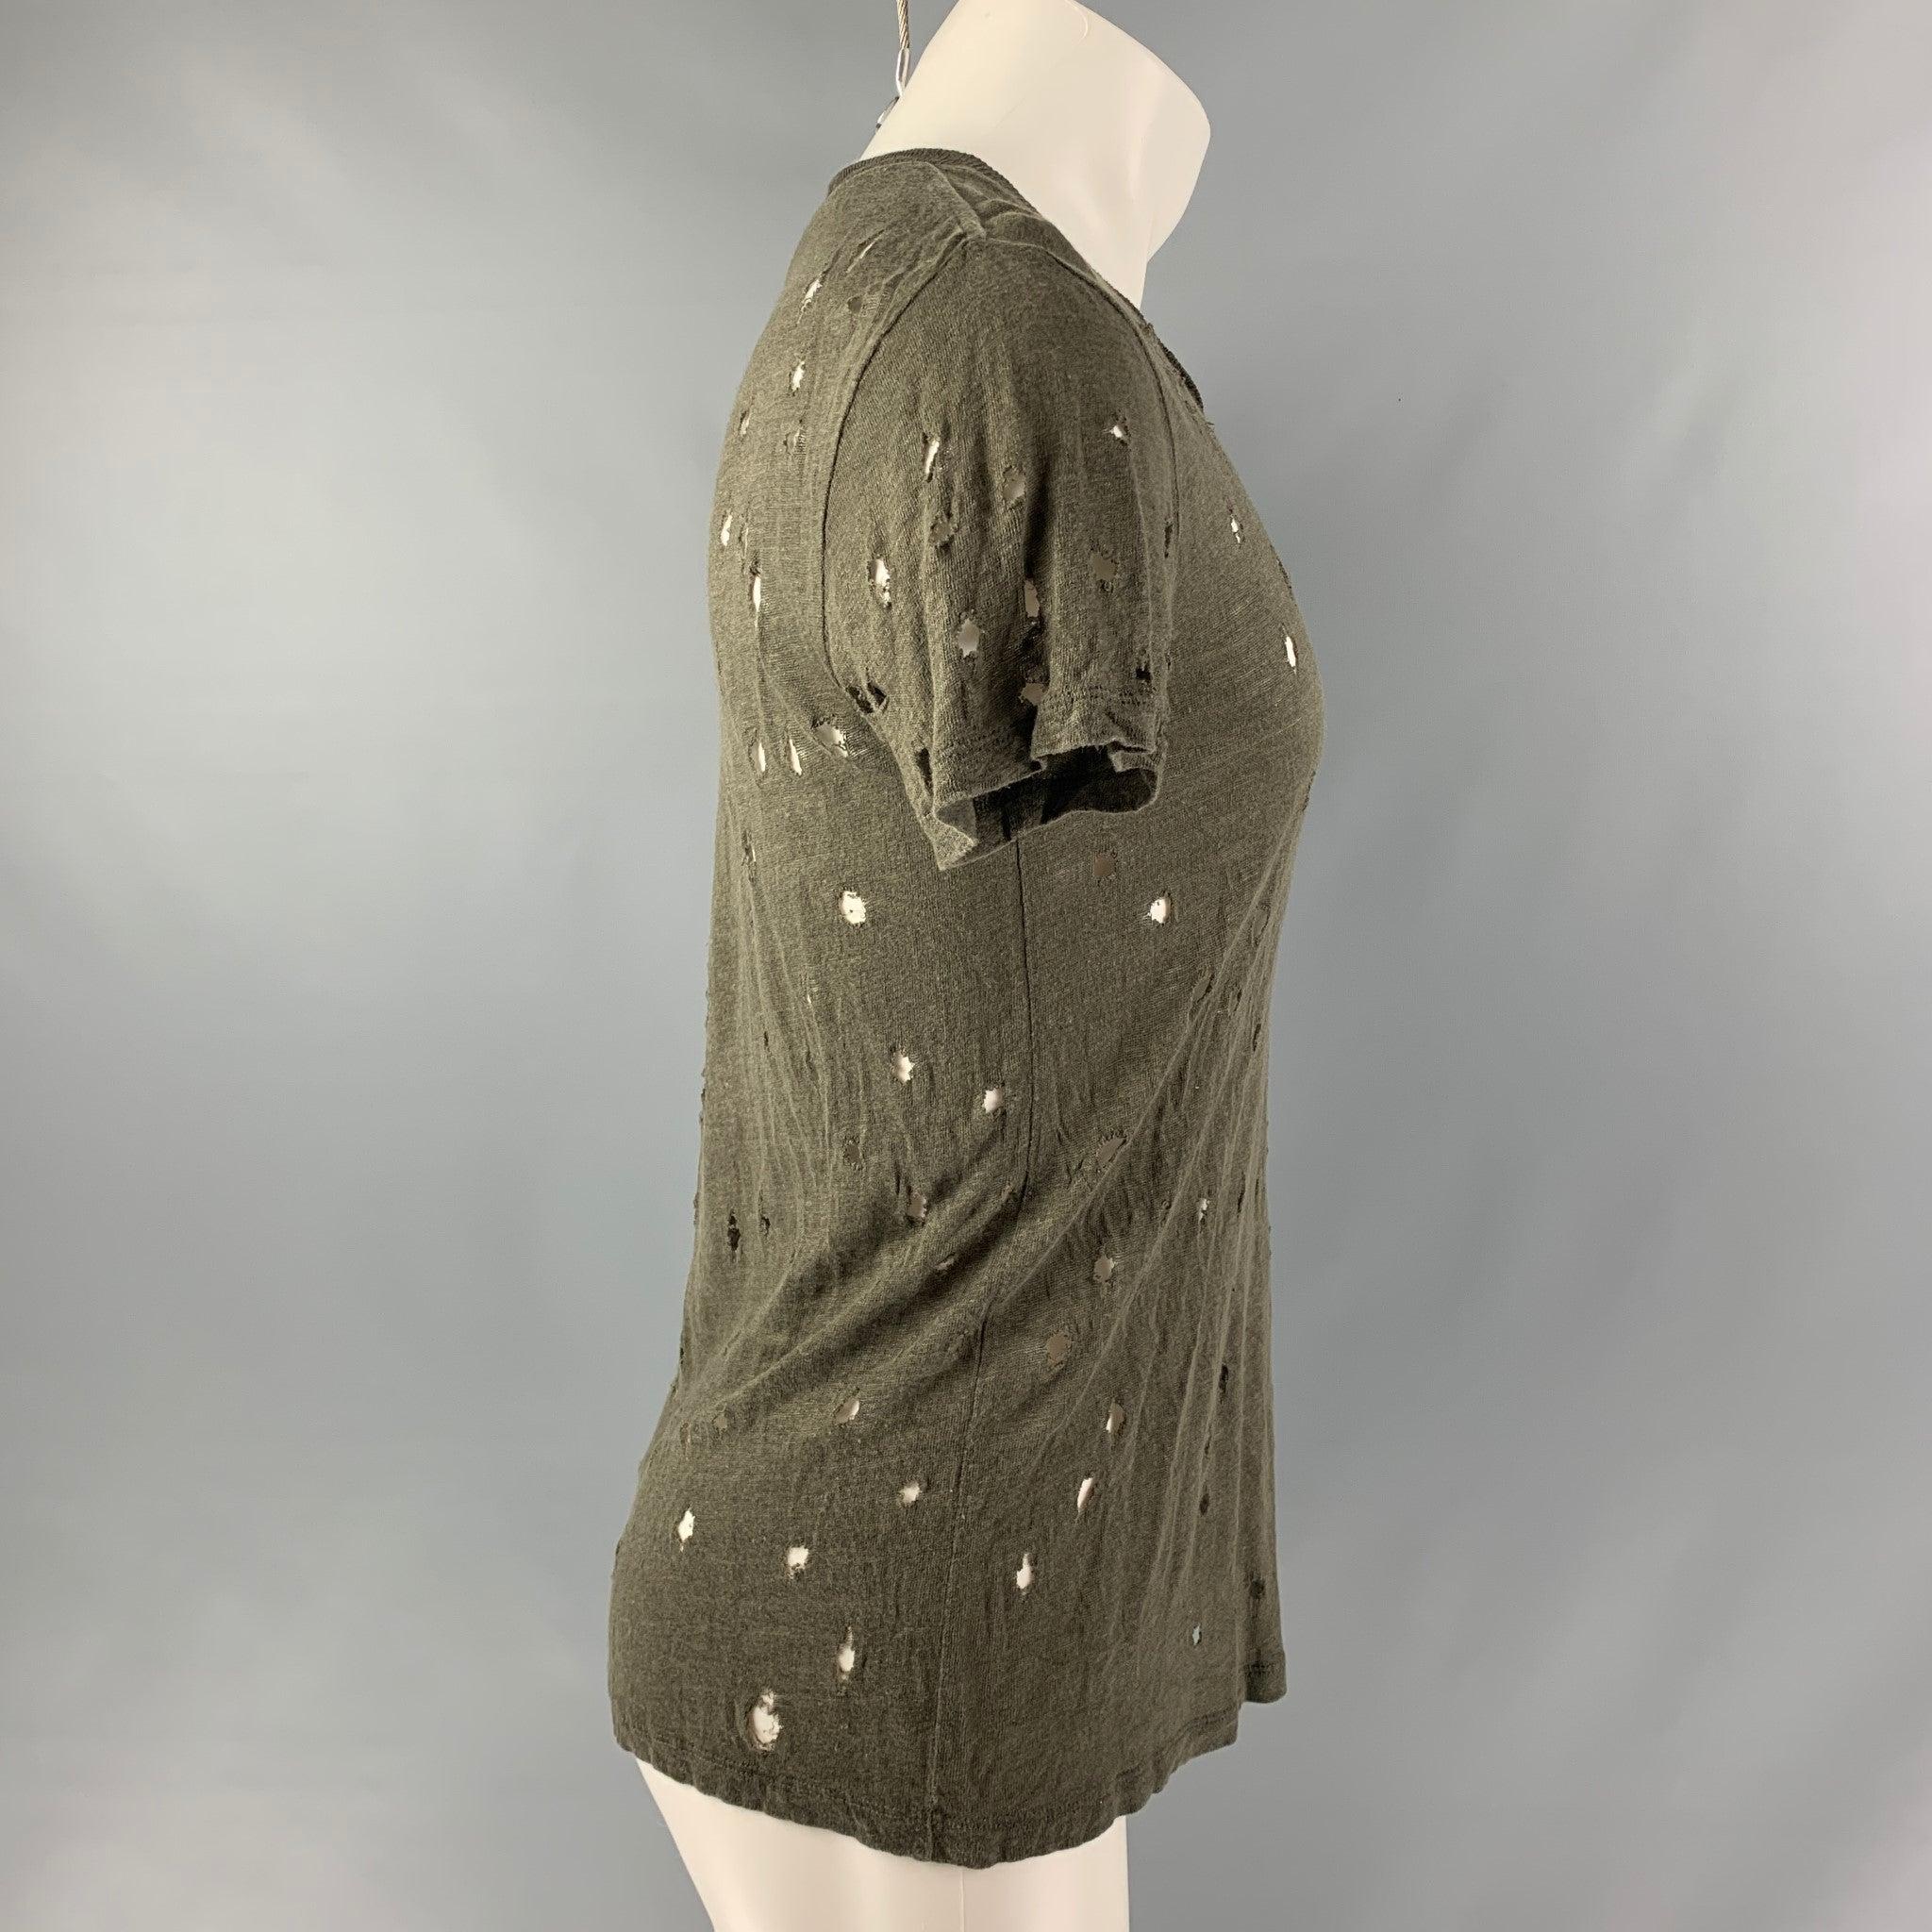 IRO 'Clay' t-shirt comes in a olive linen featuring distressed details throughout and a crew-neck. Made in Portugal. Very Good Pre-Owned Condition. 

Marked:   XS 

Measurements: 
 
Shoulder: 18 inches Chest: 46 inches Sleeve: 8 inches Length: 26.5